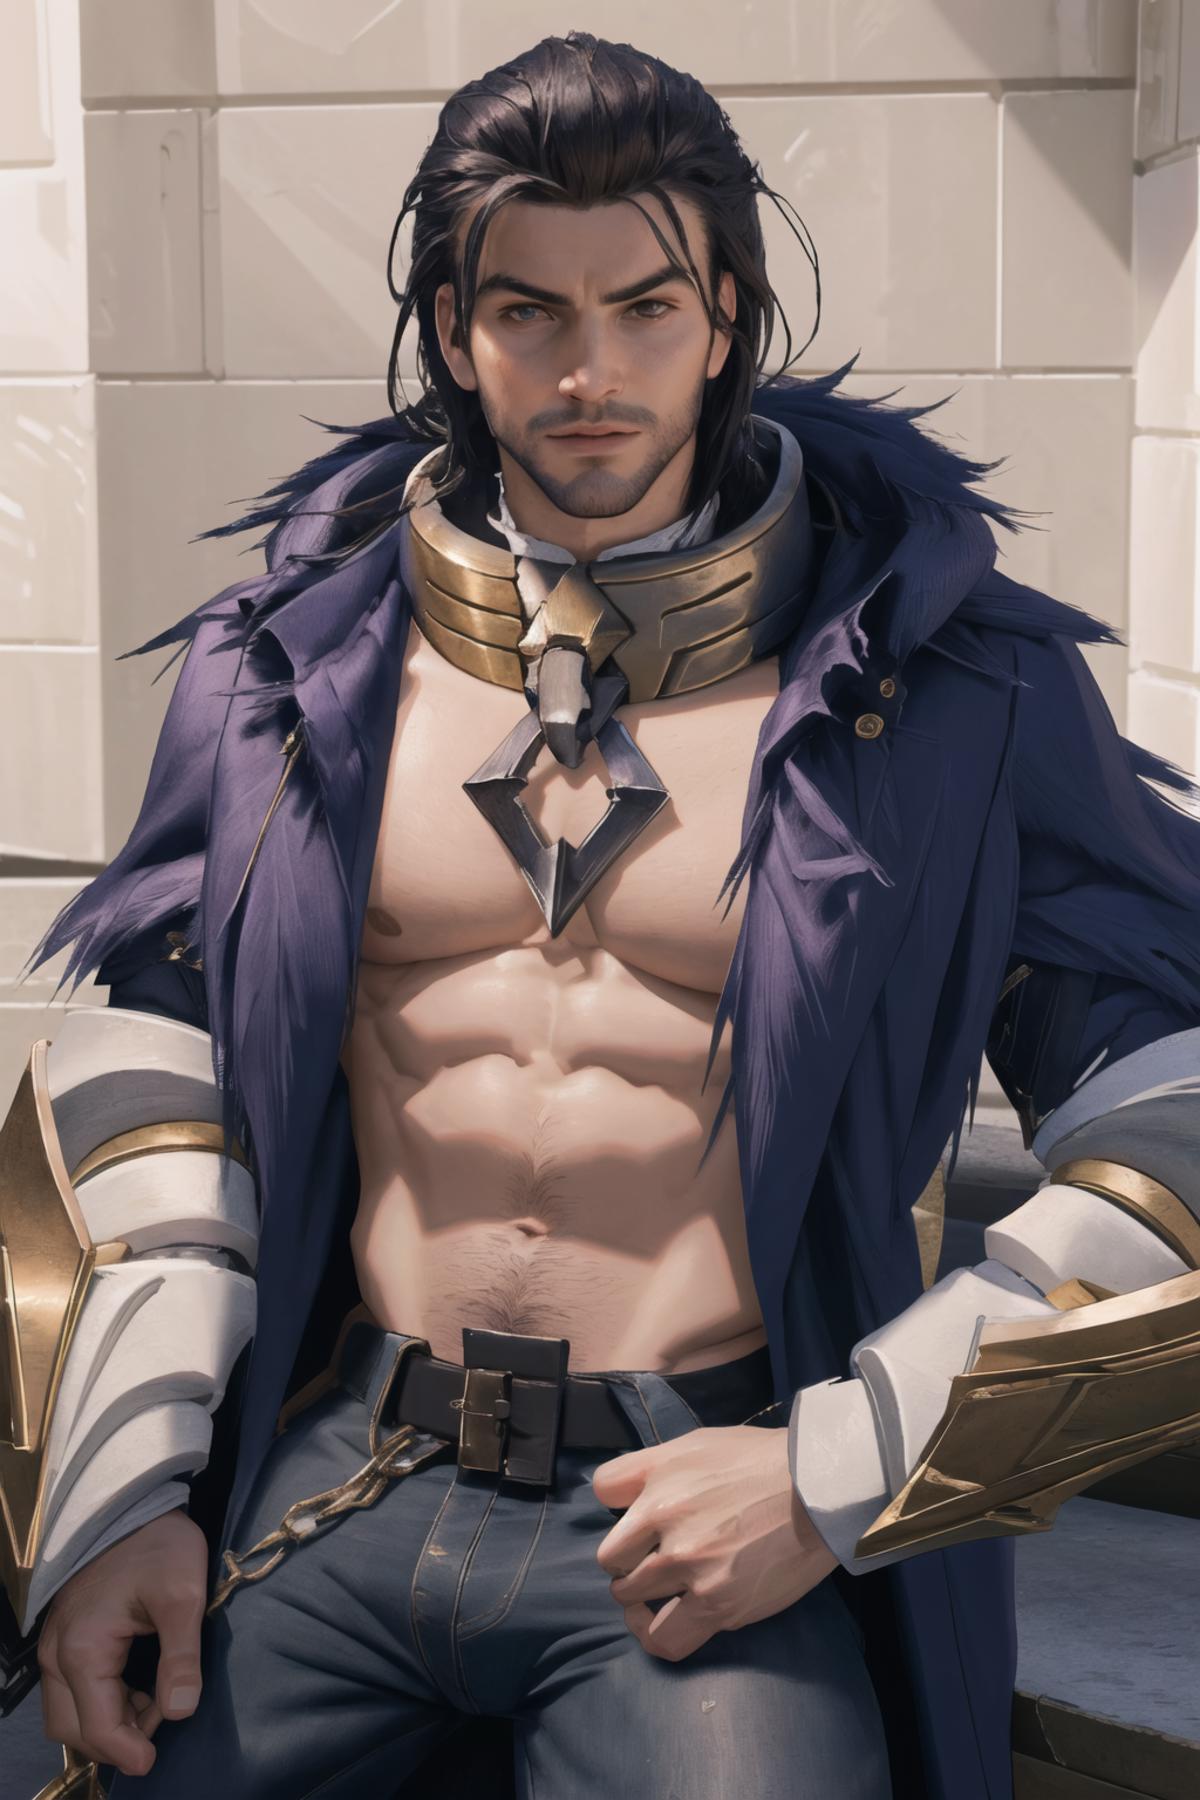 Sylas | League of Legends image by slayyeraw